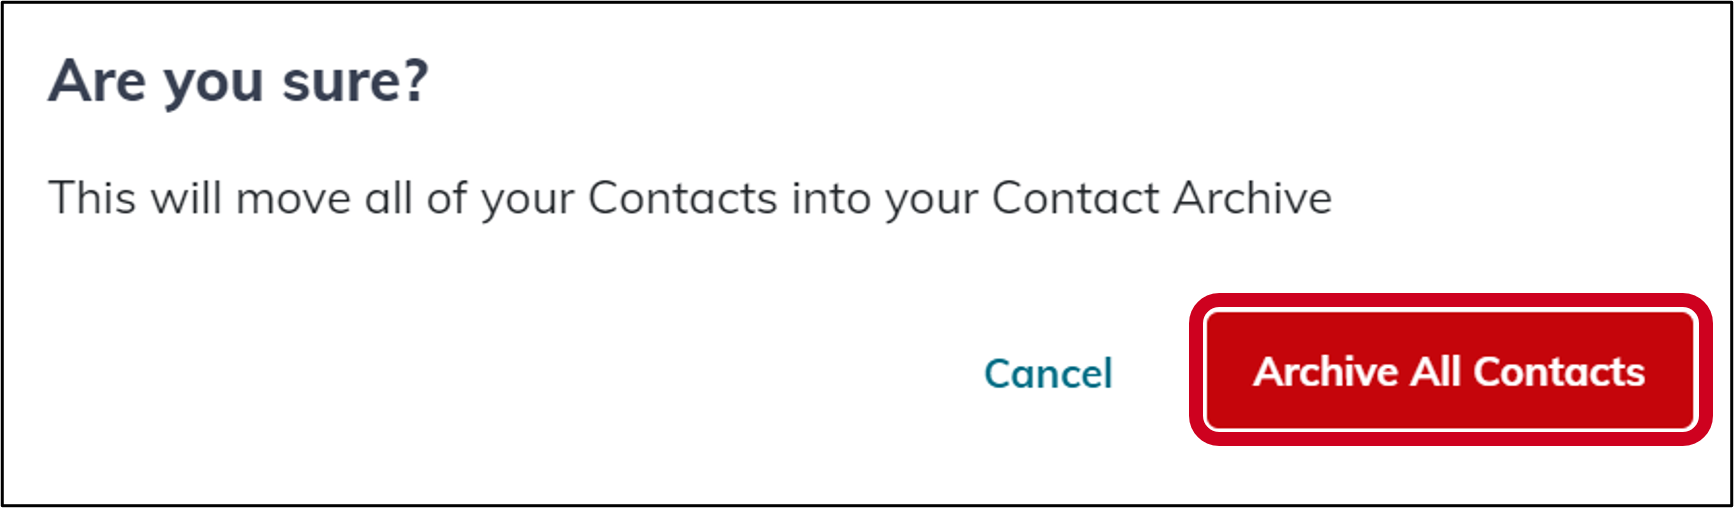 settings_contacts_confirm_archive_all.png